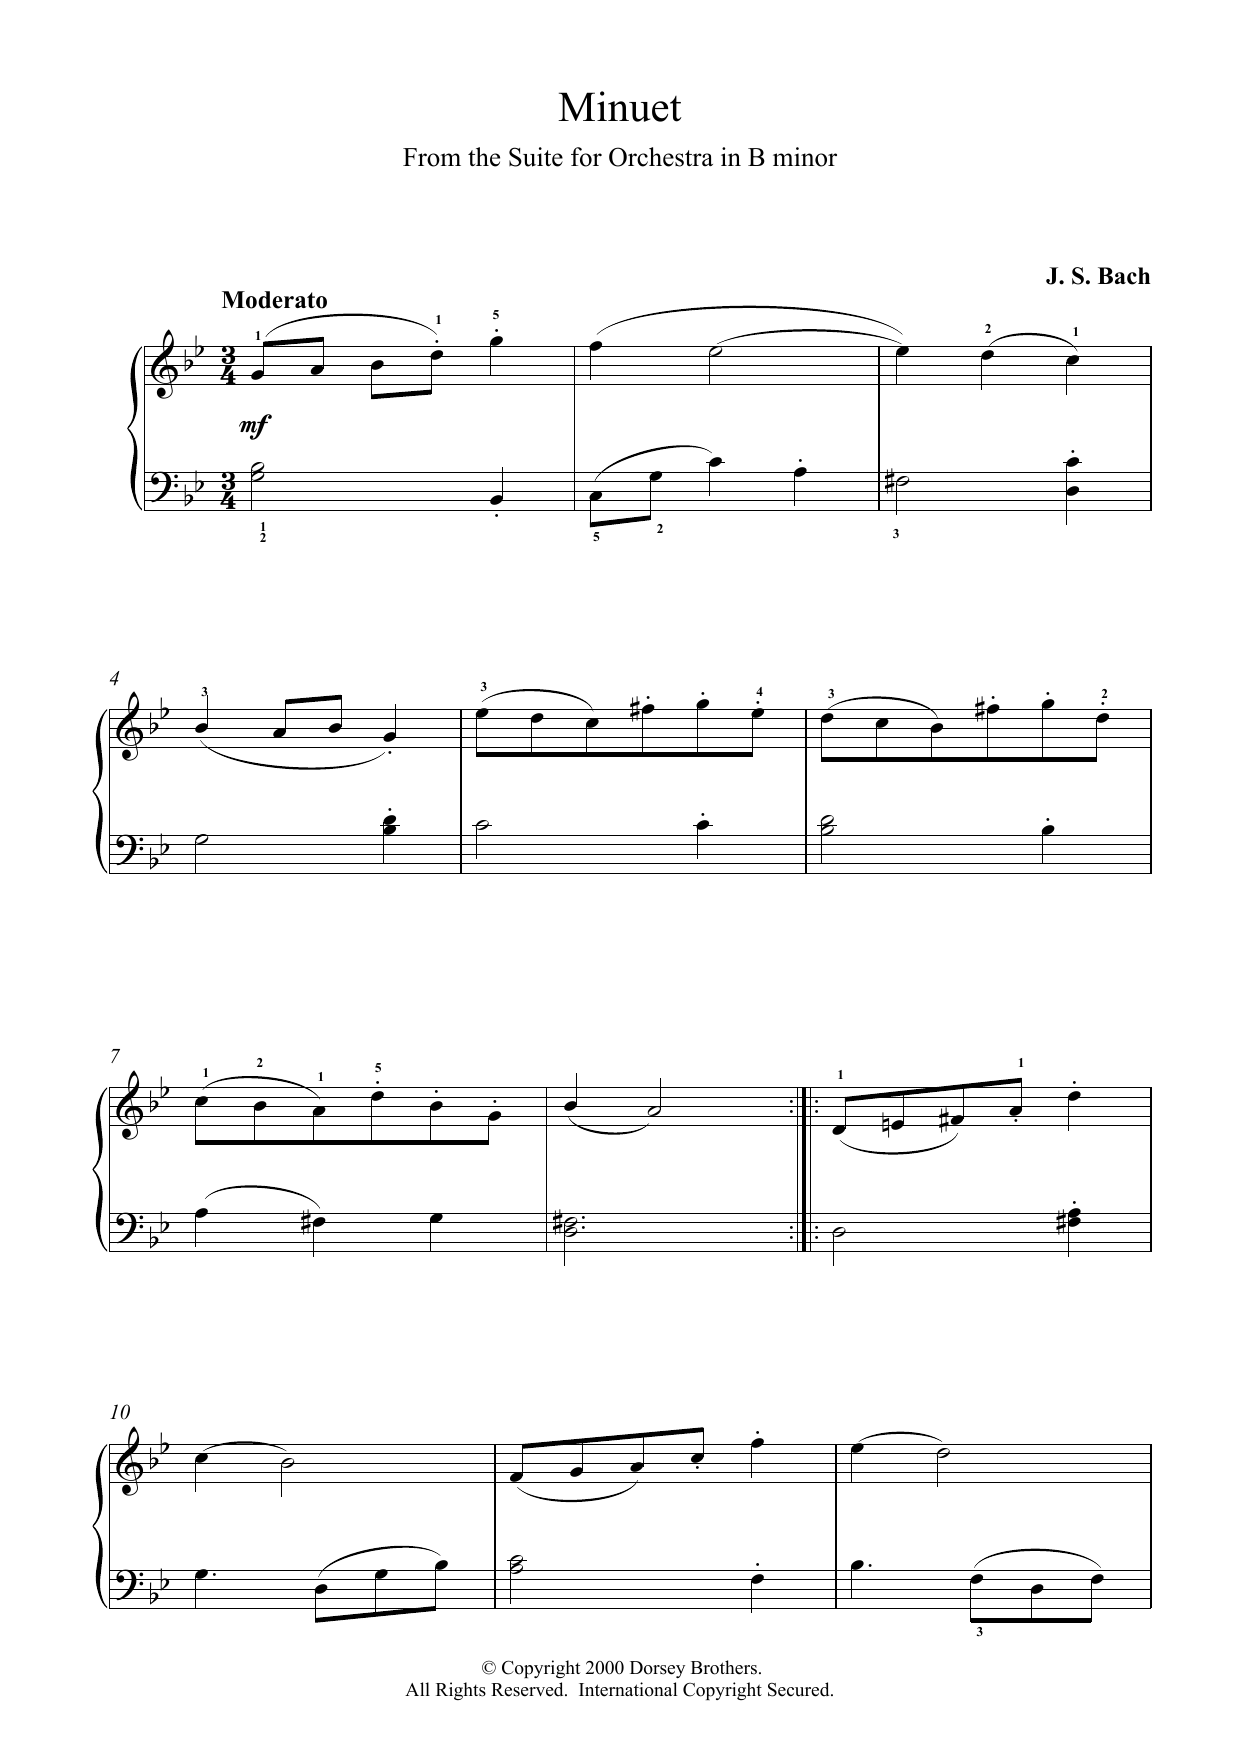 Johann Sebastian Bach Minuet (from Orchestral Suite No. 2 in B Minor) sheet music notes and chords. Download Printable PDF.